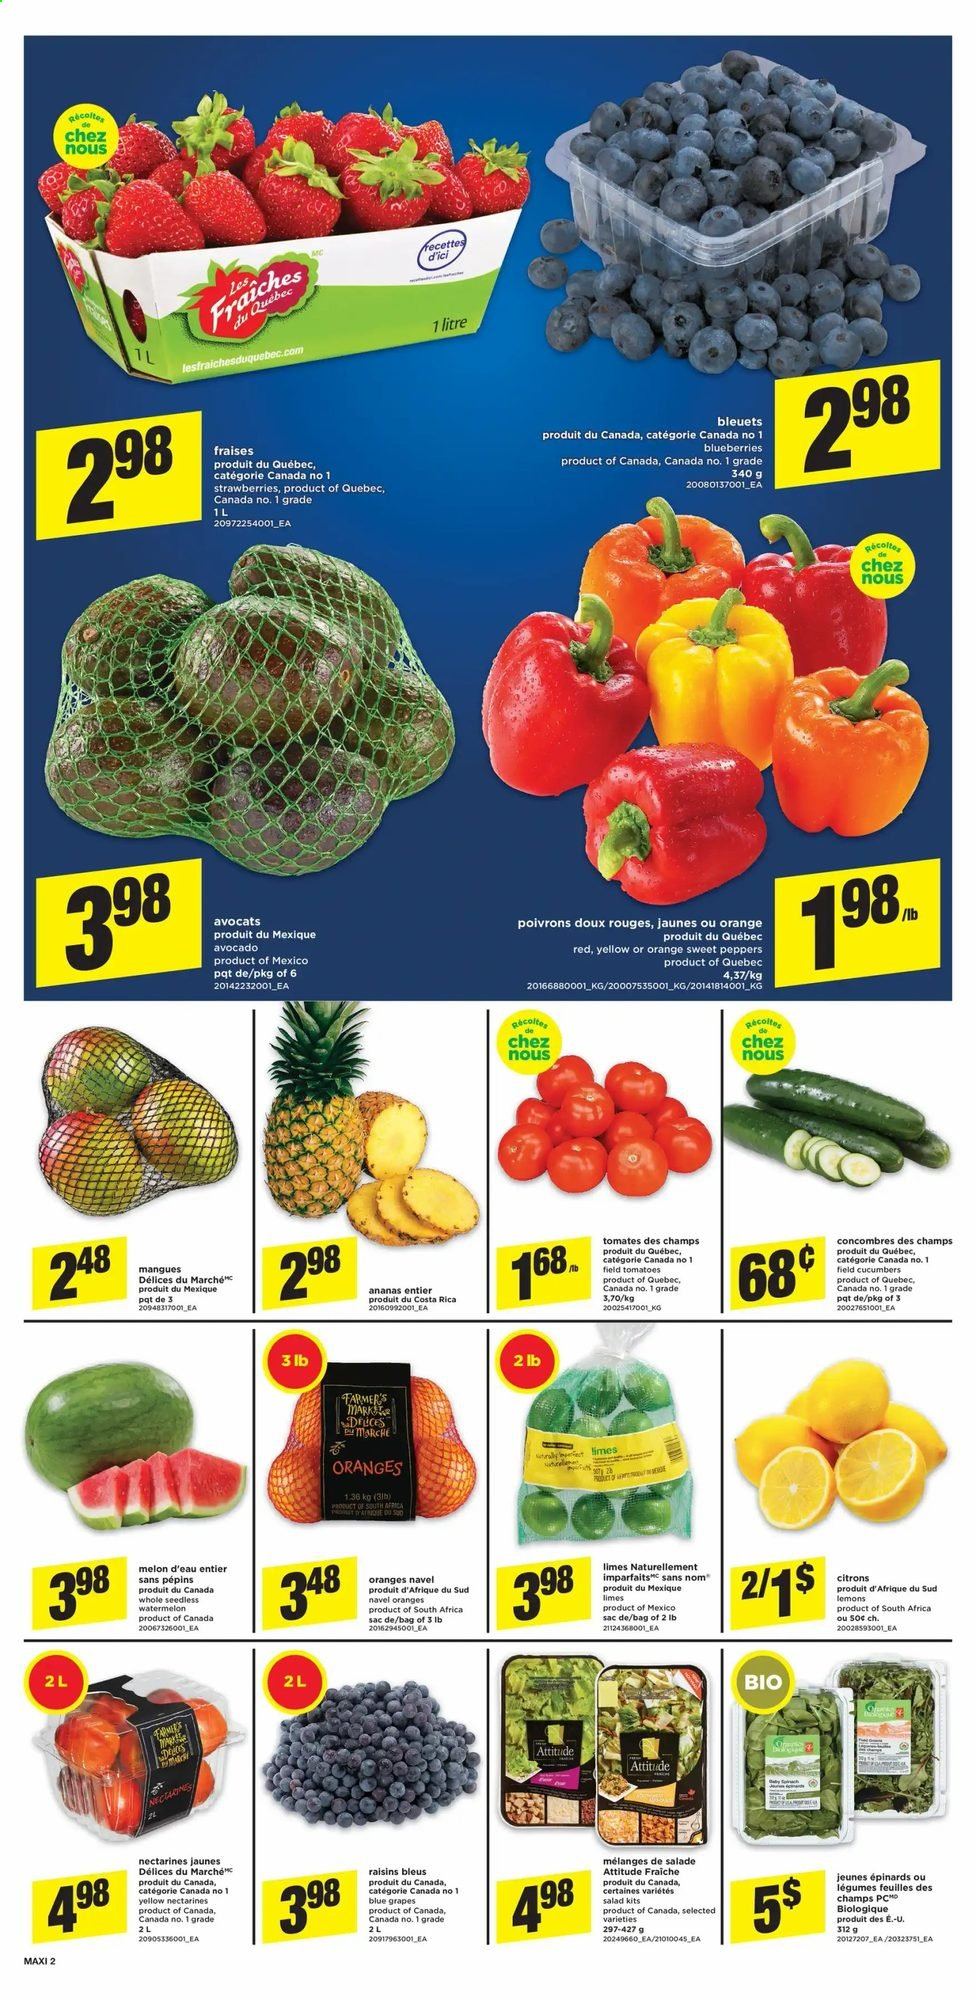 thumbnail - Maxi & Cie Flyer - August 19, 2021 - August 25, 2021 - Sales products - cucumber, sweet peppers, tomatoes, salad, peppers, avocado, blueberries, grapes, limes, nectarines, strawberries, watermelon, melons, lemons, navel oranges, dried fruit, raisins. Page 3.